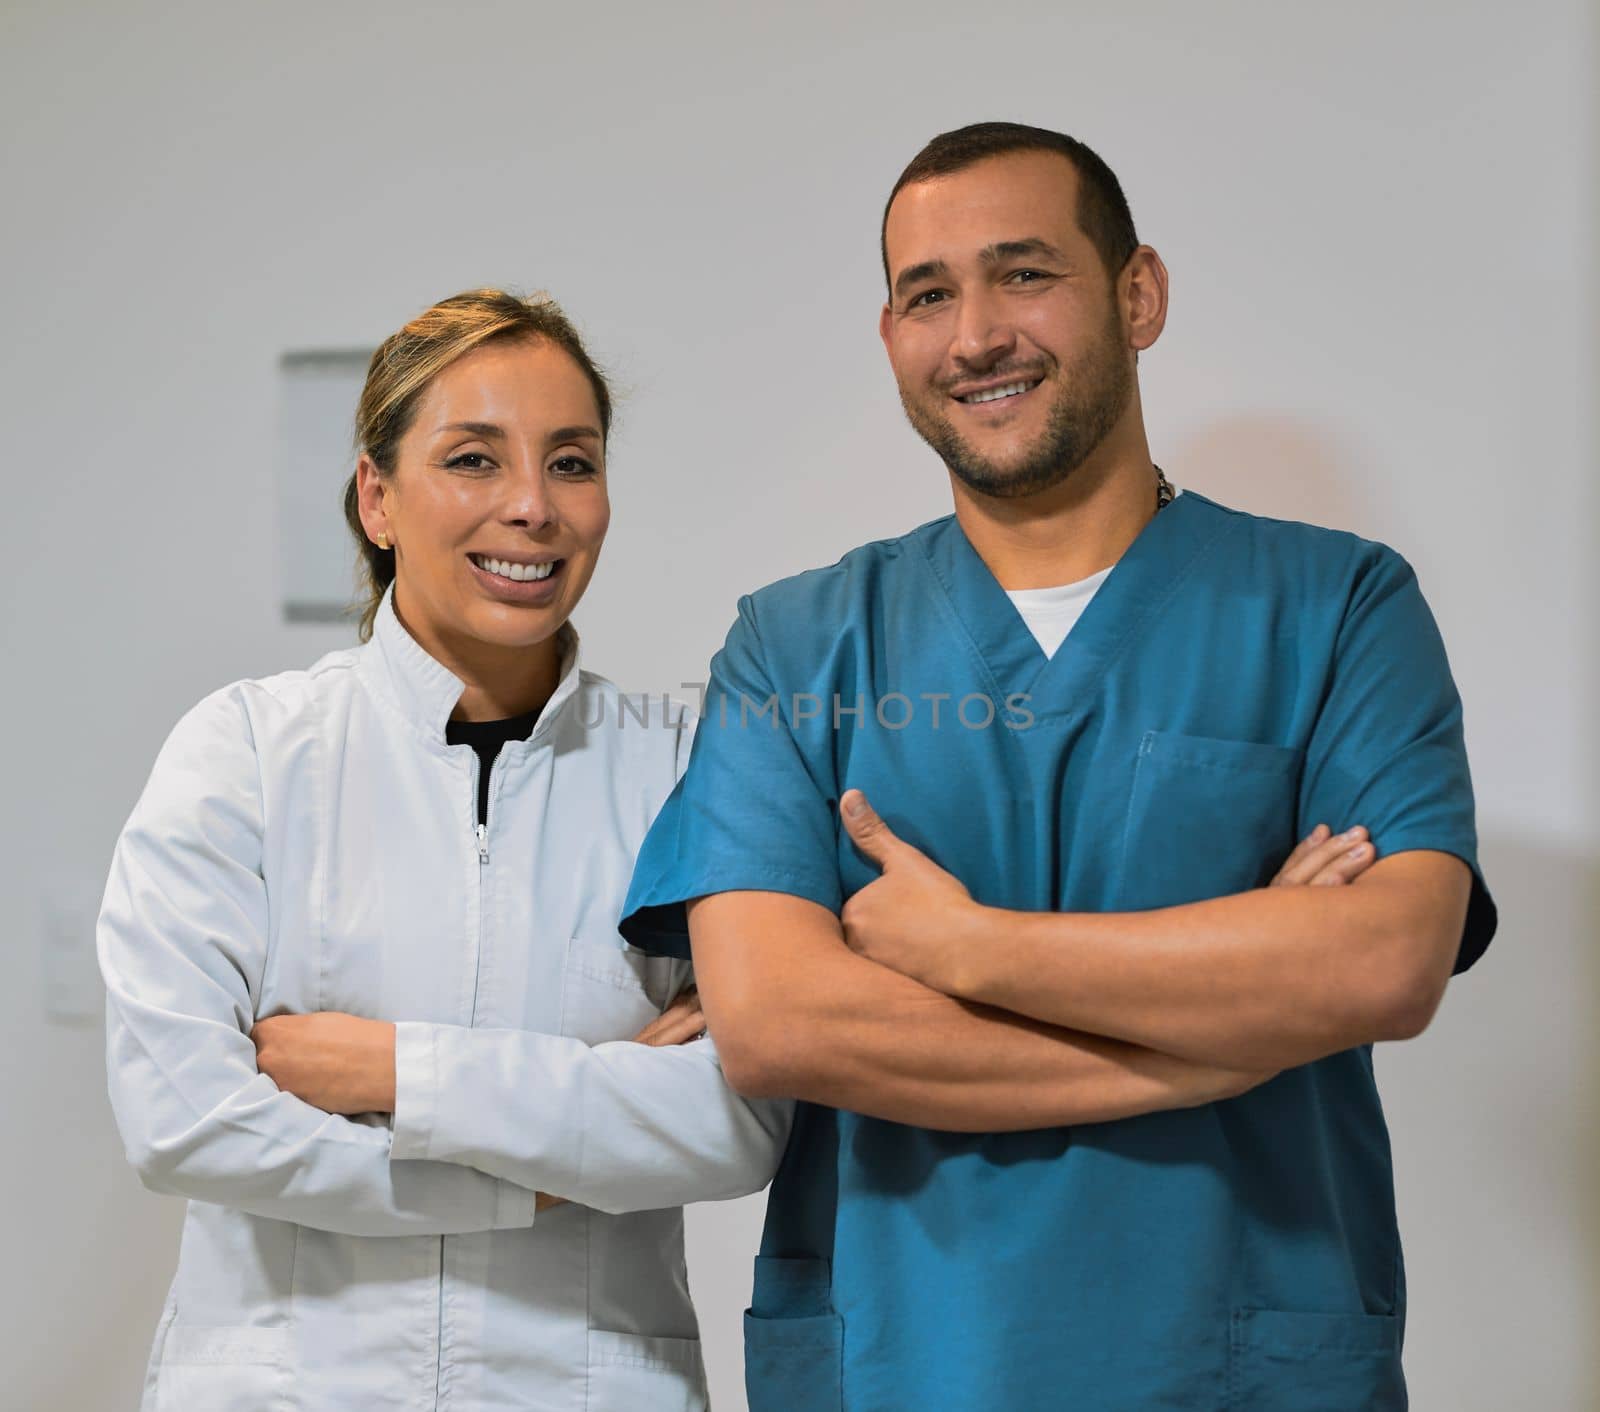 They will take care of all your tooth related problems. two confident young dentists standing with arms folded while looking into the camera inside the office